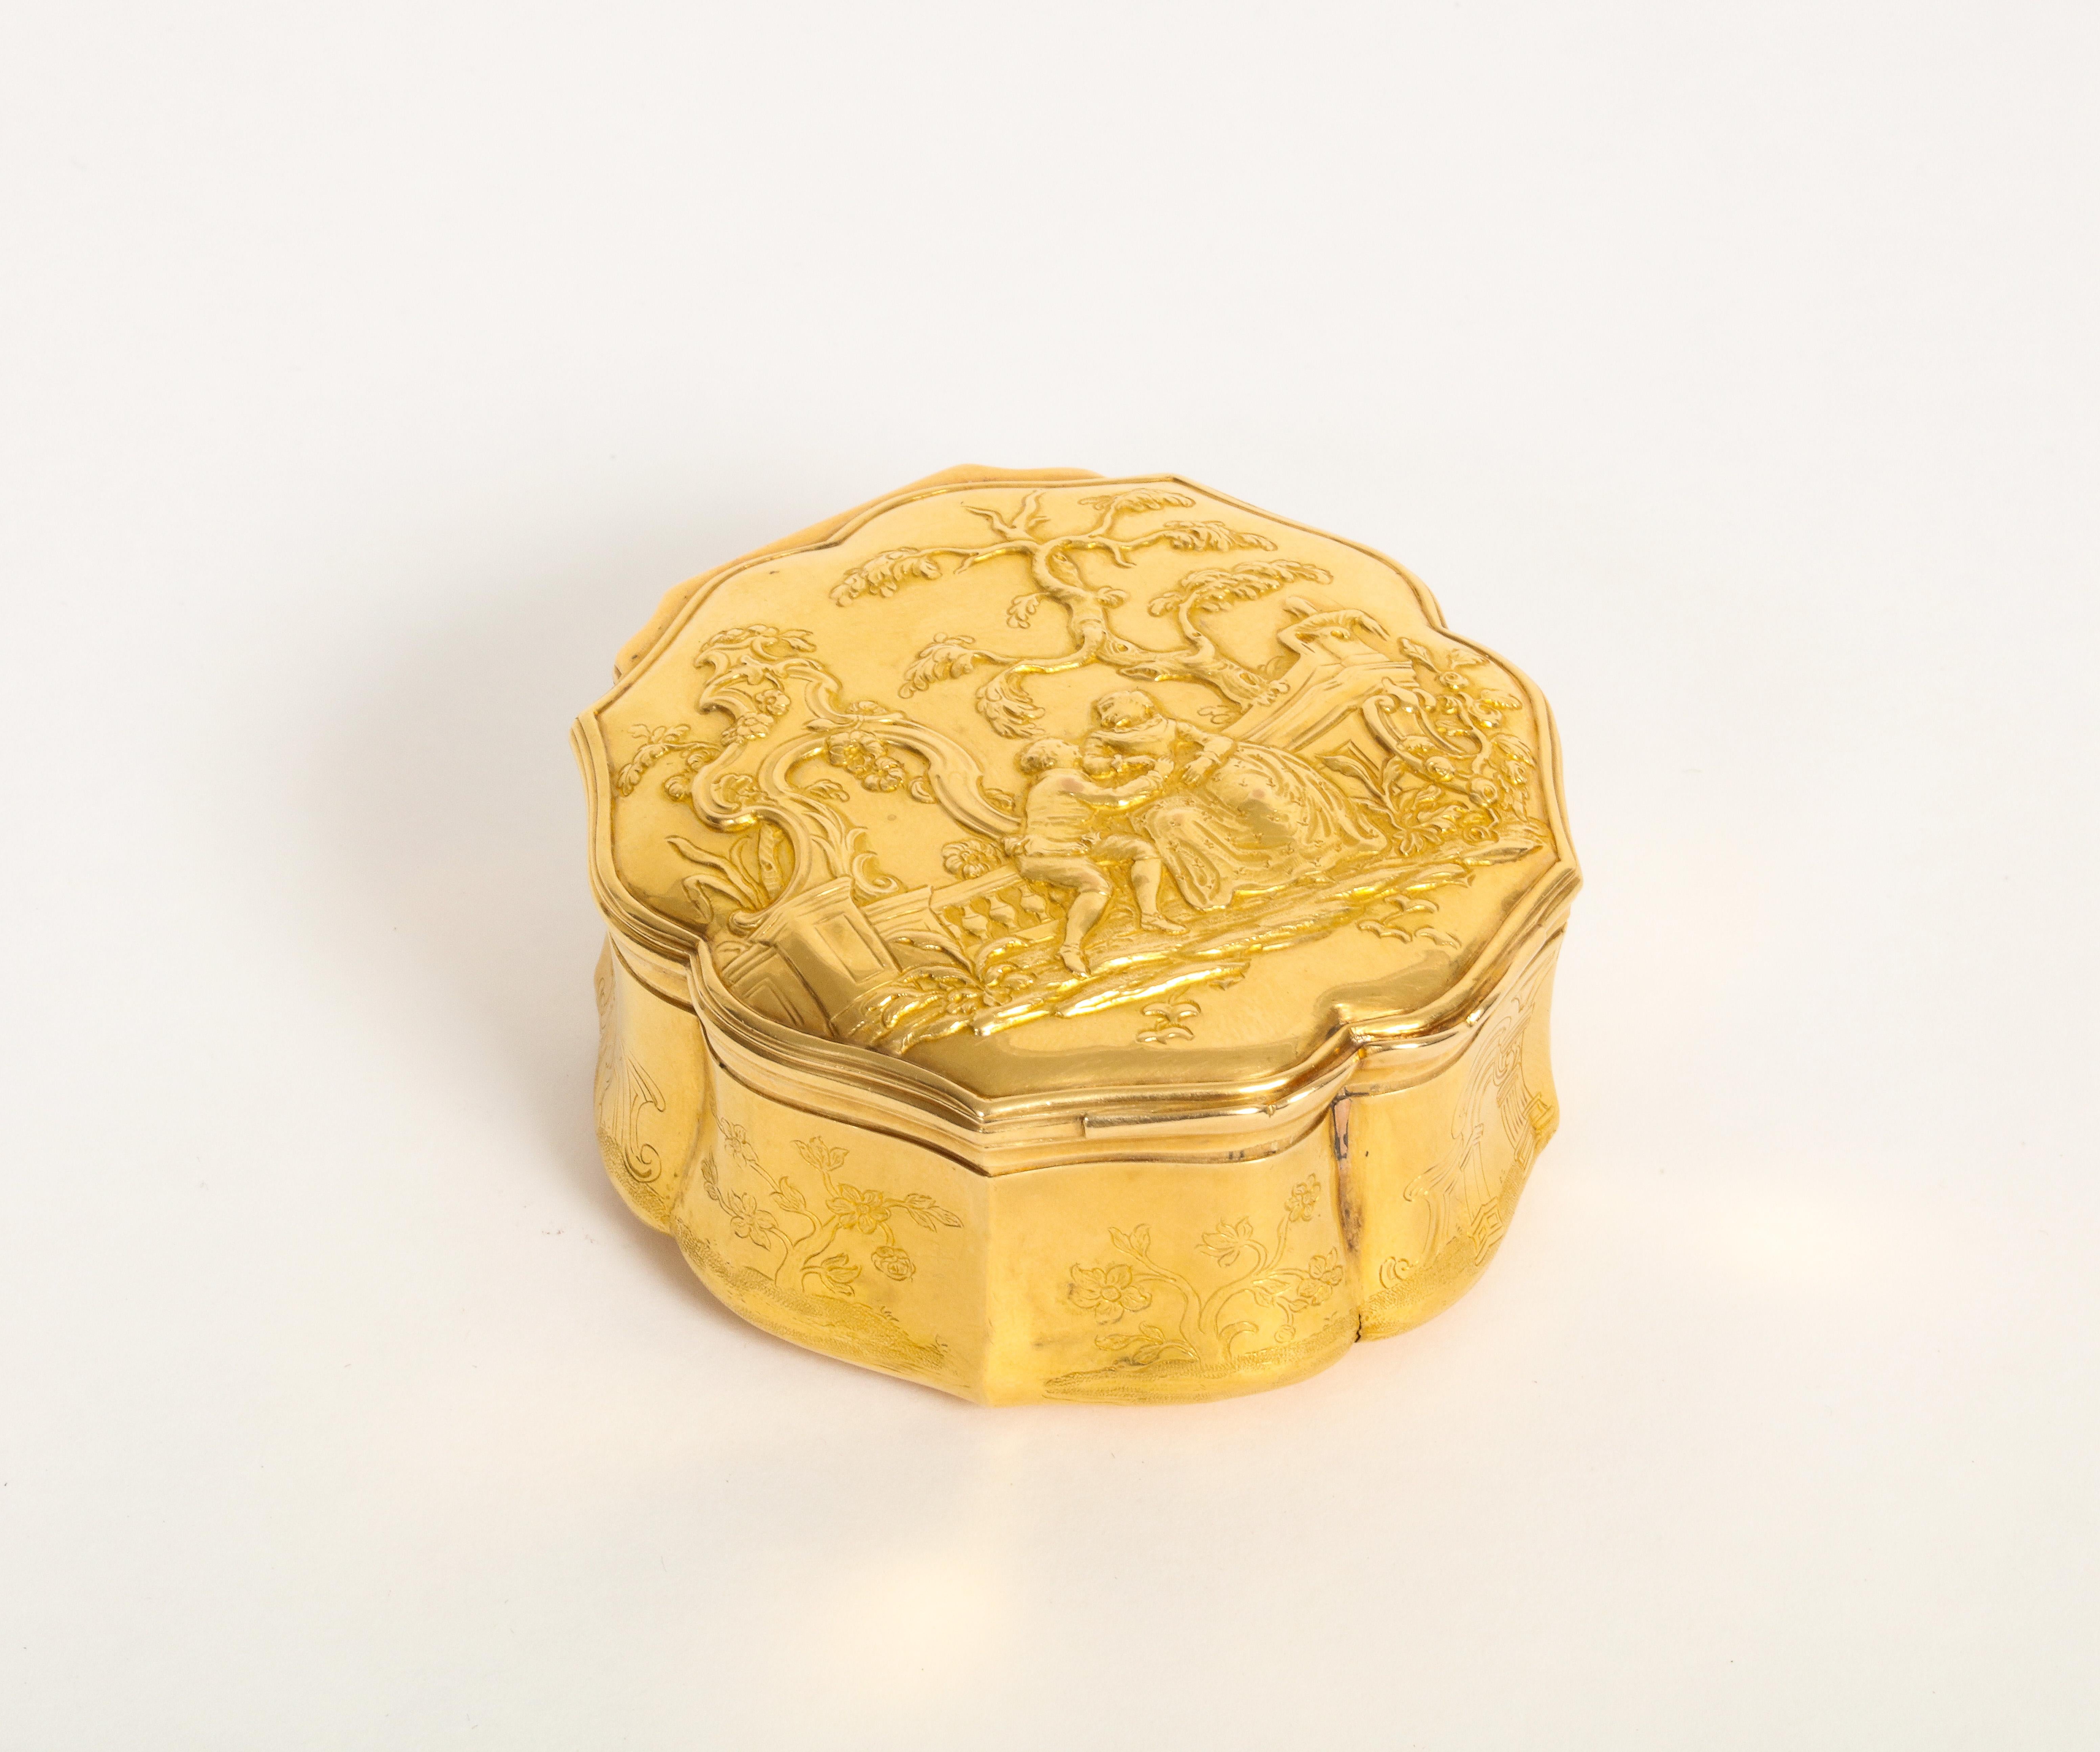 Round gold snuff box
Round snuff box in 18k gold, the lid chiseled with a romantic scene on a balustrade background, in the woods landscape, the inside of the lid decorated with a miniature under glass representing an interior scene with characters